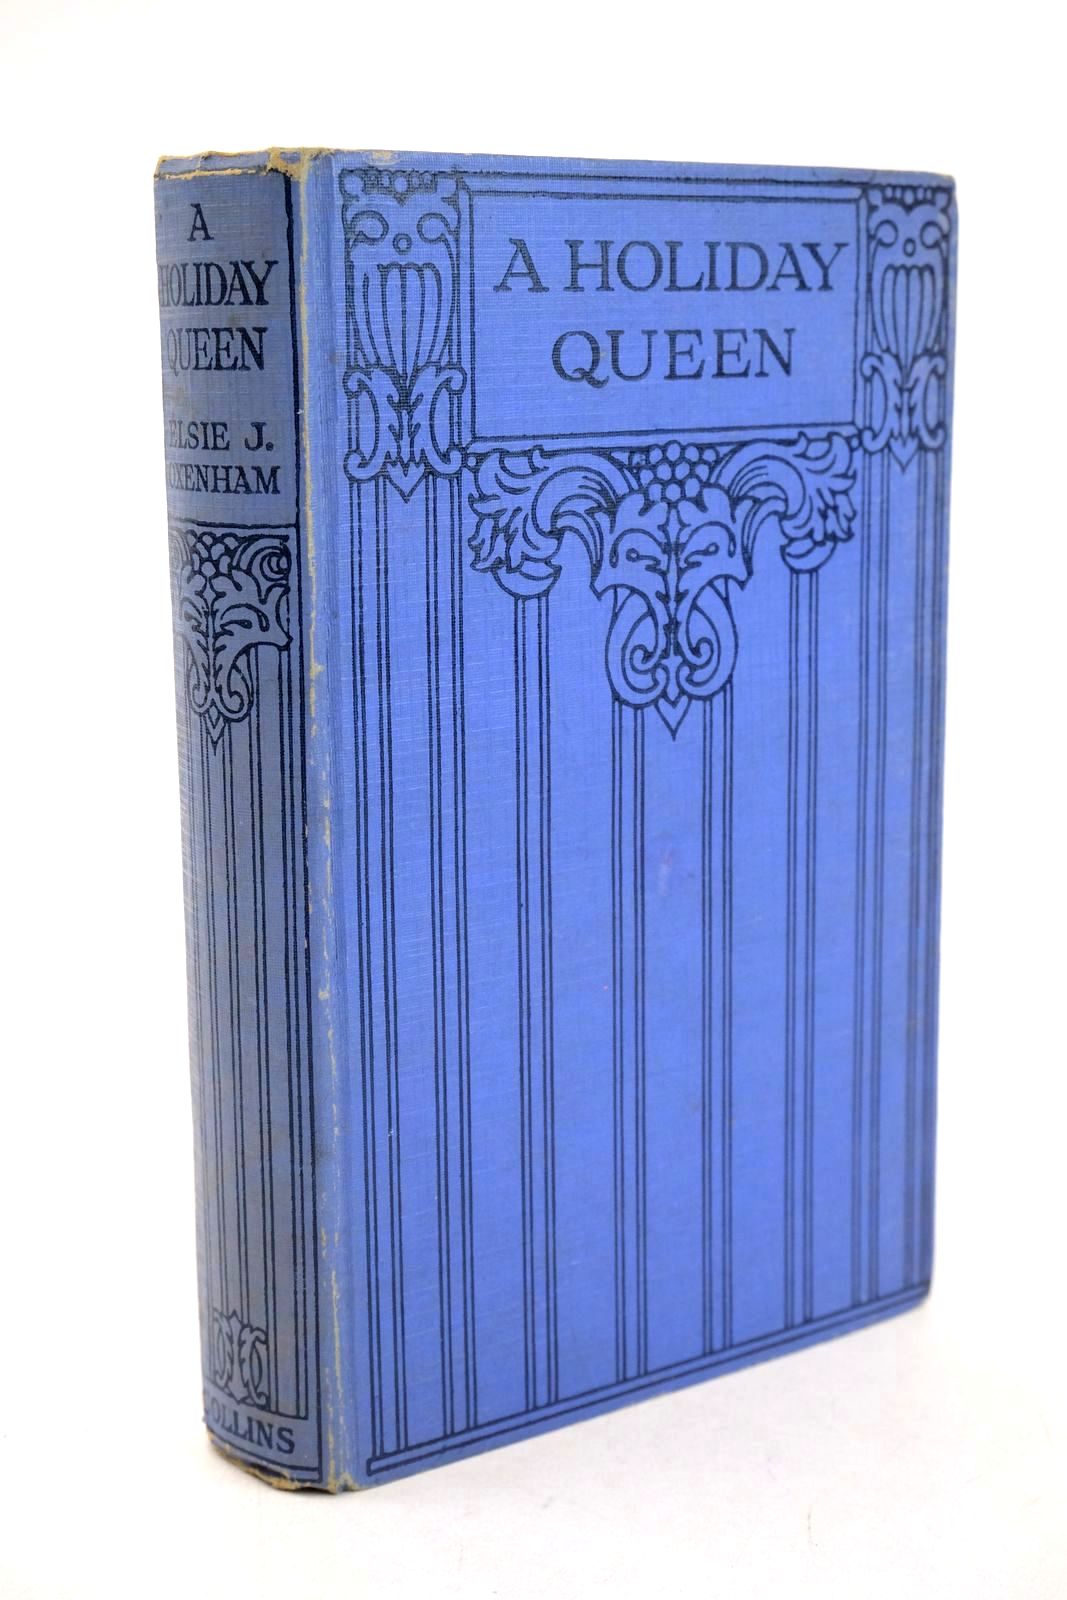 Photo of A HOLIDAY QUEEN written by Oxenham, Elsie J. illustrated by Robinson, Charles published by Collins Clear-Type Press (STOCK CODE: 1327248)  for sale by Stella & Rose's Books